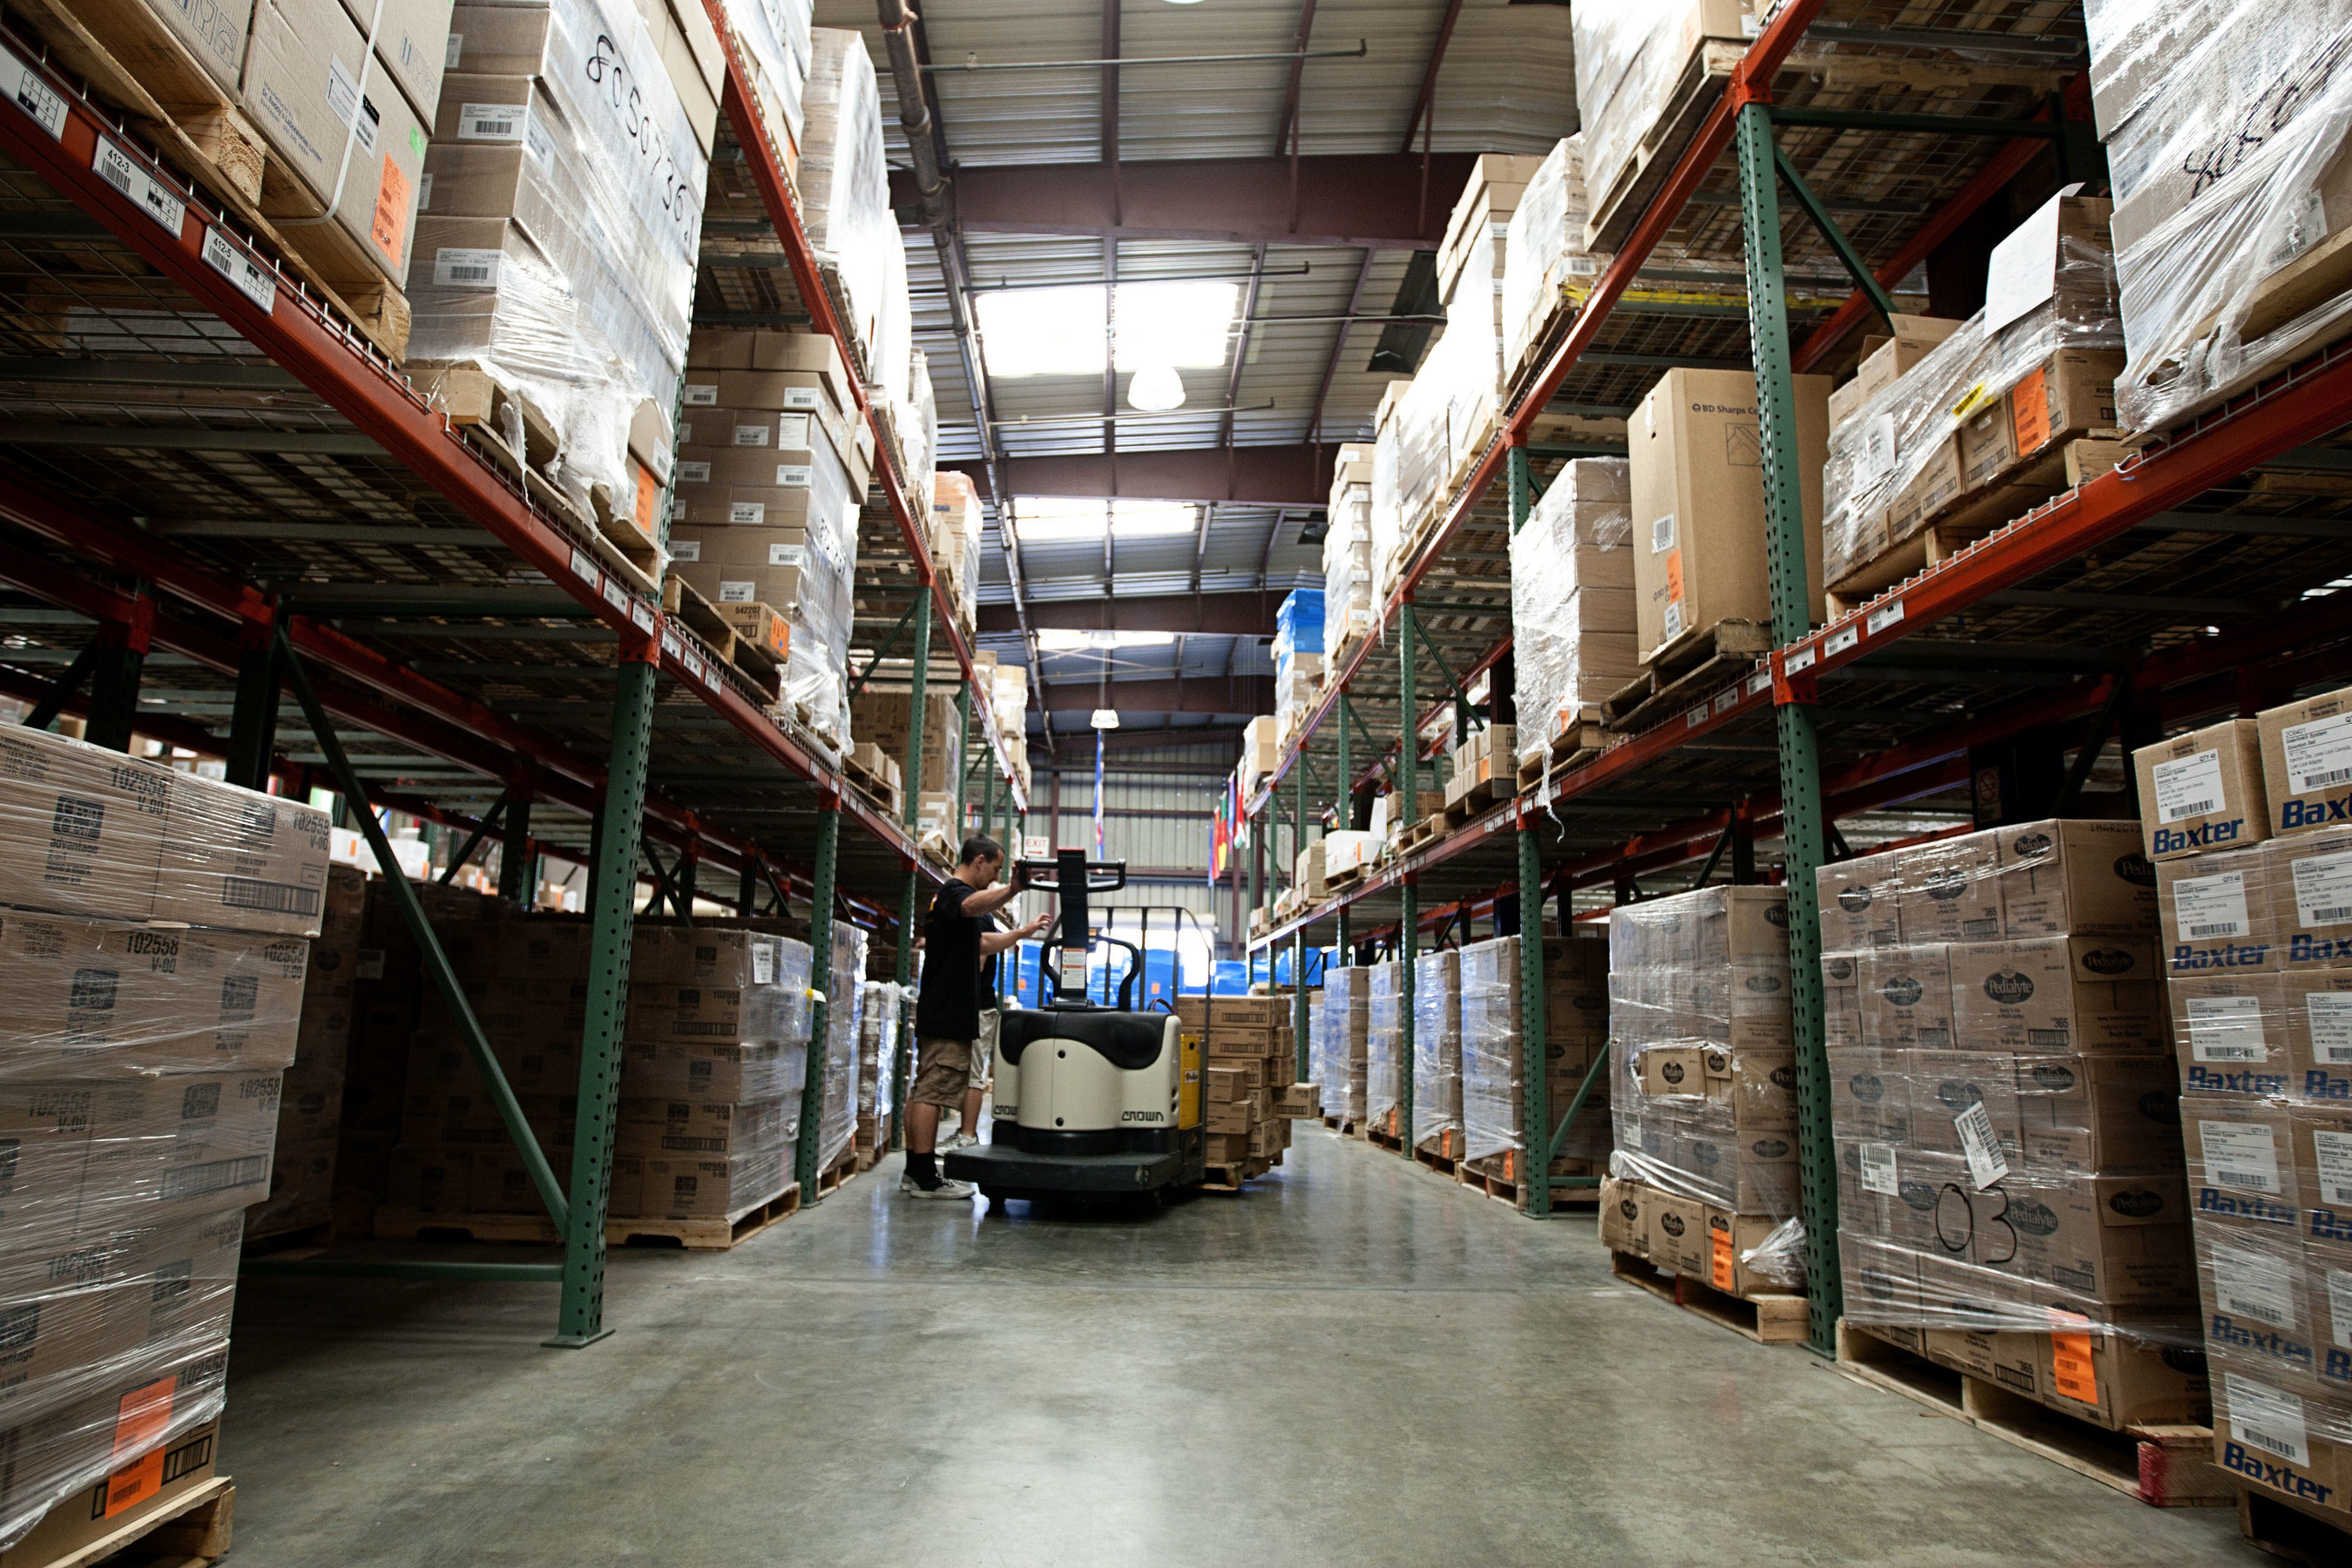 Humanitarian medical inventory in Direct Relief warehouse. (http://www.directrelief.org)